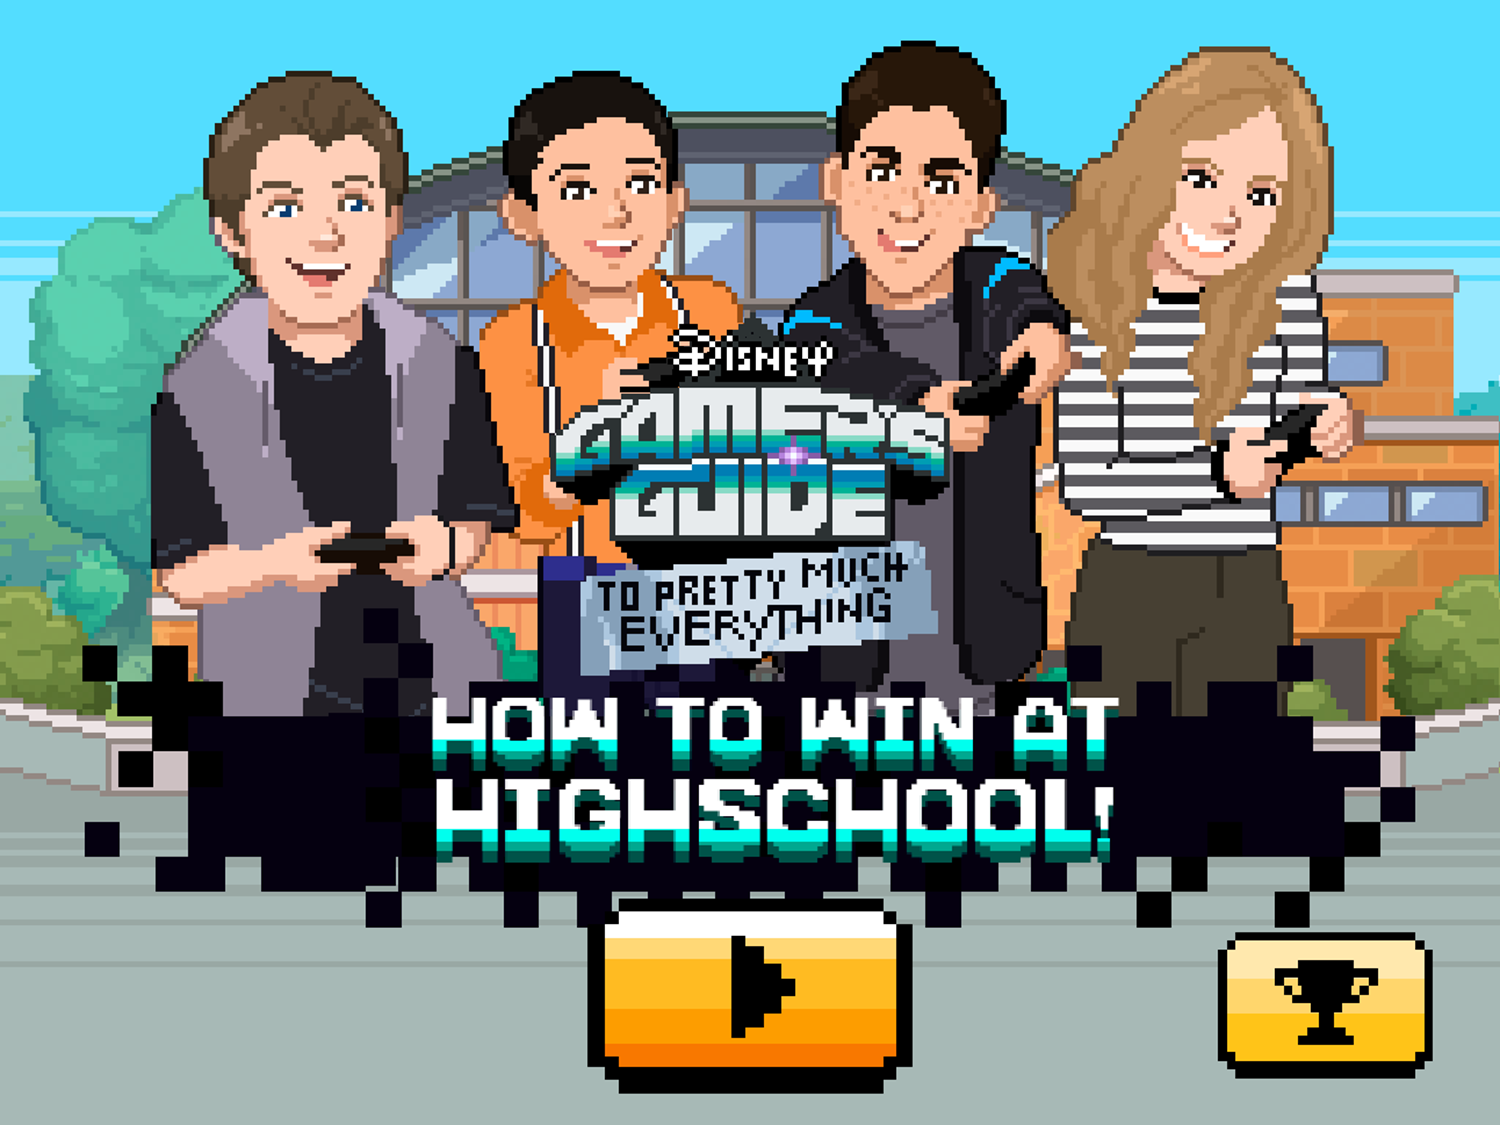 Gamer's Guide How to Win at High School Game Welcome Screen Screenshot.